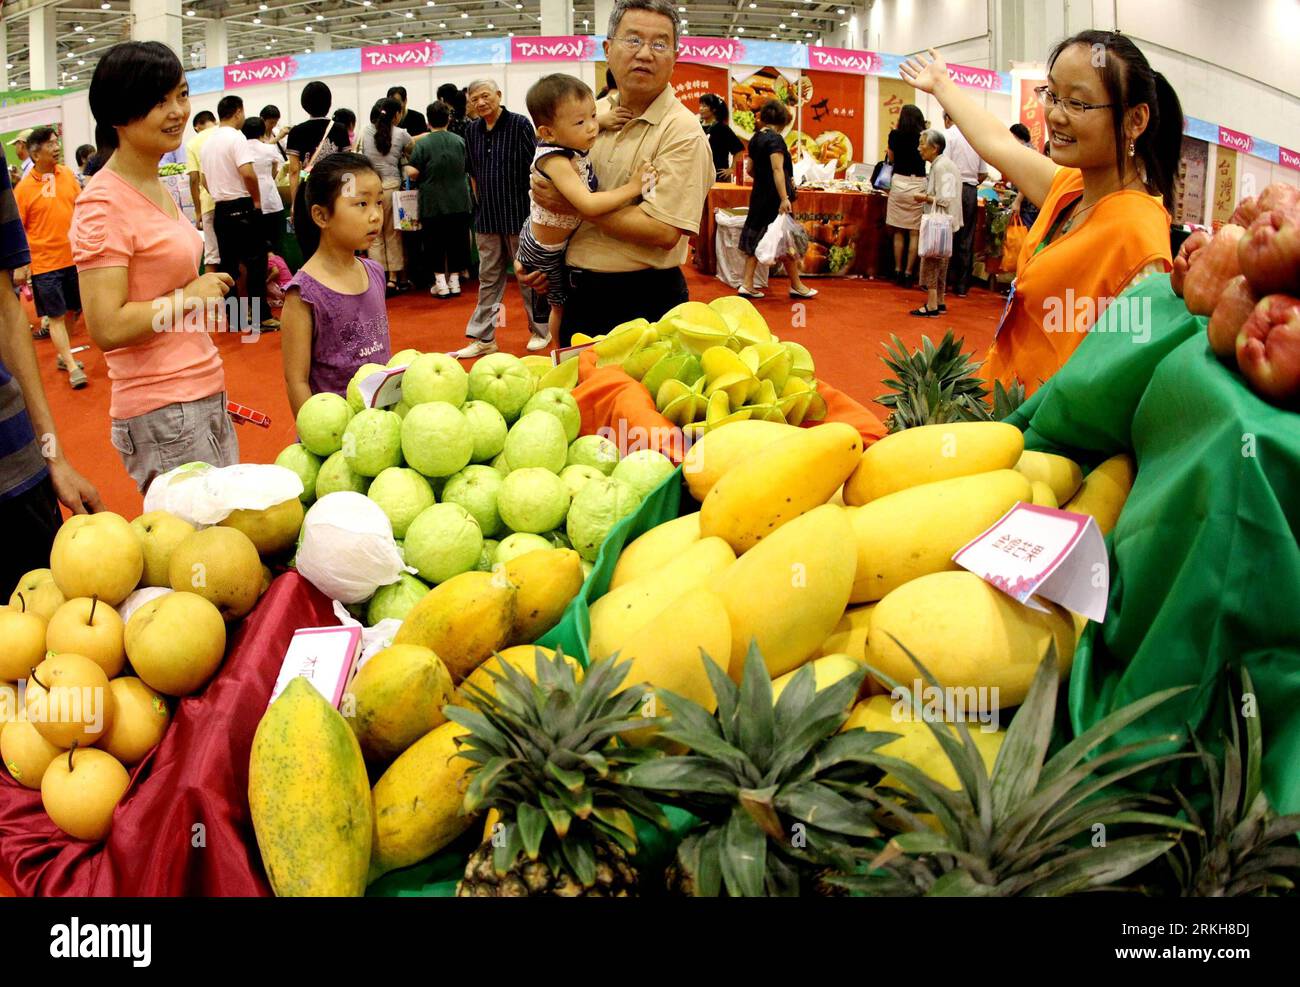 Bildnummer: 55715282  Datum: 12.08.2011  Copyright: imago/Xinhua (110812) -- SUZHOU, Aug. 12, 2011 (Xinhua) -- Fruits from China s Taiwan are on show in the 2011 Cross-Strait Agricultural Products Trade Fair held in Suzhou City, east China s Jiangsu Province, Aug. 12, 2011. The trade fair kicked off here Friday. (Xinhua/Wang Jianzhong) (dtf) #CHINA-SUZHOU-AGRICULTURE-FAIR (CN) PUBLICATIONxNOTxINxCHN Wirtschaft Messe Lebensmittel Lebensmittelmesse Landwirtschaft Landwirtschaftsmesse x0x xst 2011 quer     Bildnummer 55715282 Date 12 08 2011 Copyright Imago XINHUA  Suzhou Aug 12 2011 XINHUA Fruit Stock Photo